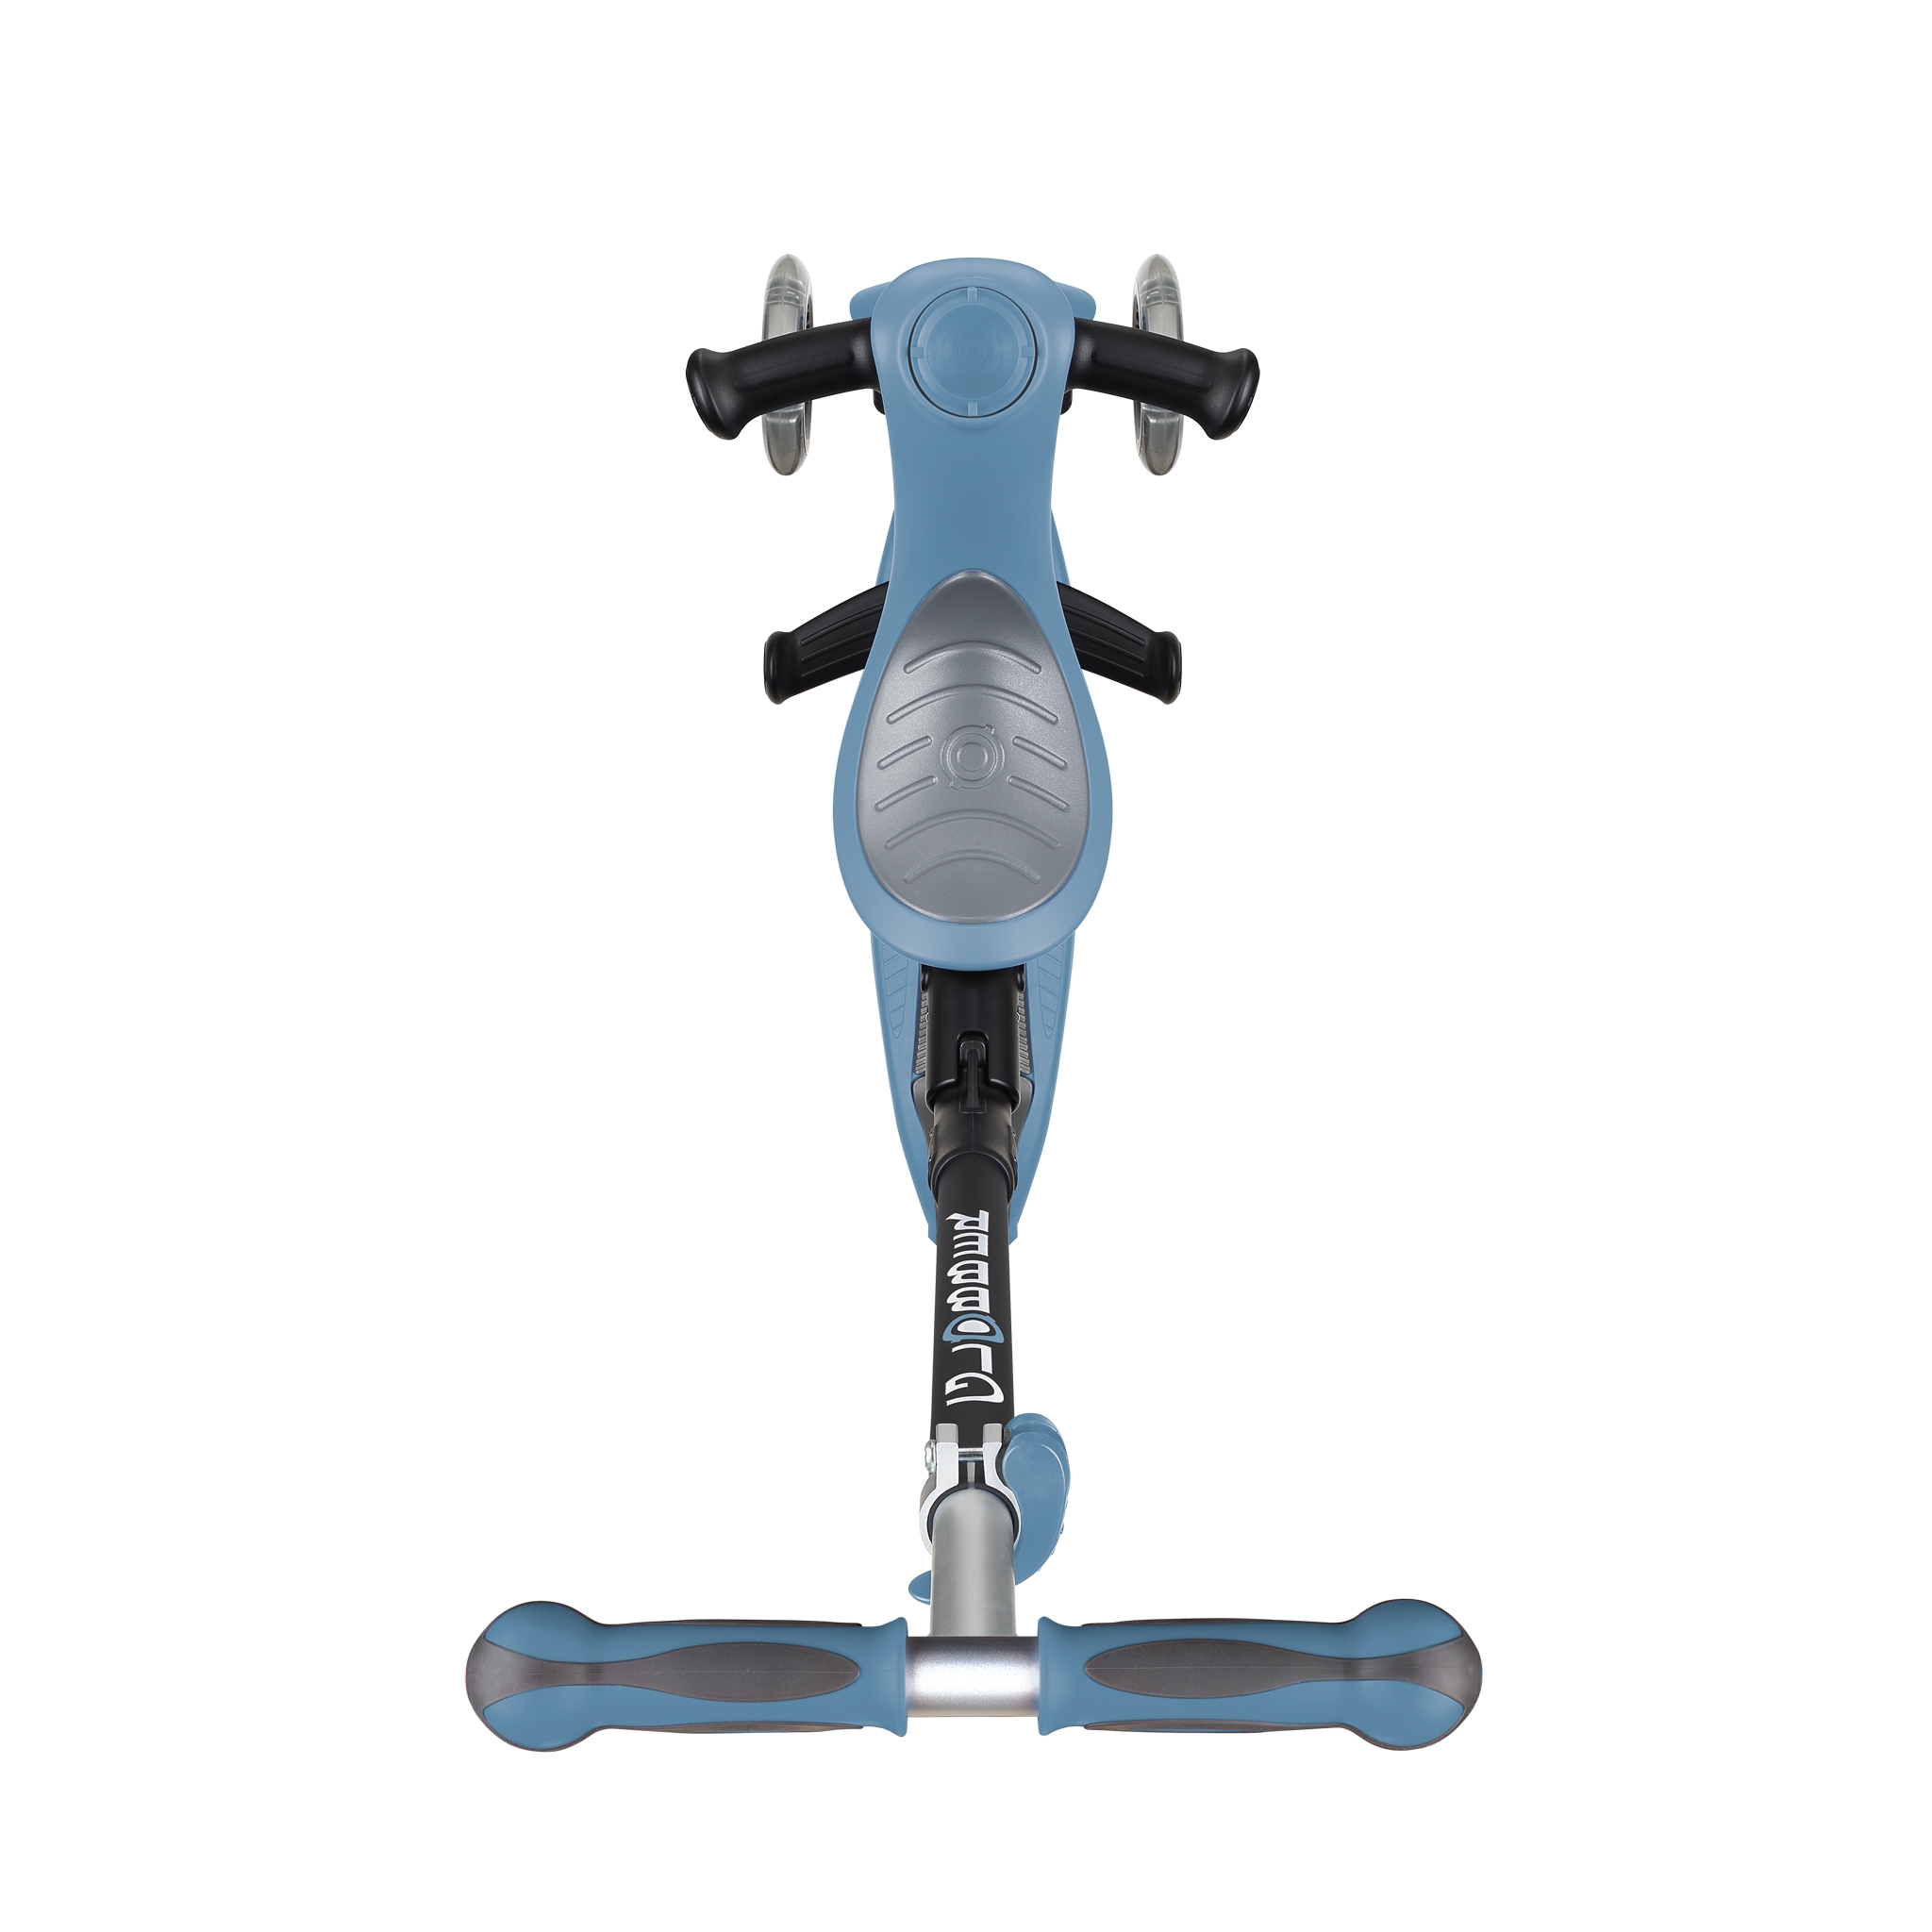 GO-UP-DELUXE-ride-on-walking-bike-scooter-with-extra-wide-3-height-adjustable-seat-ash-blue 2